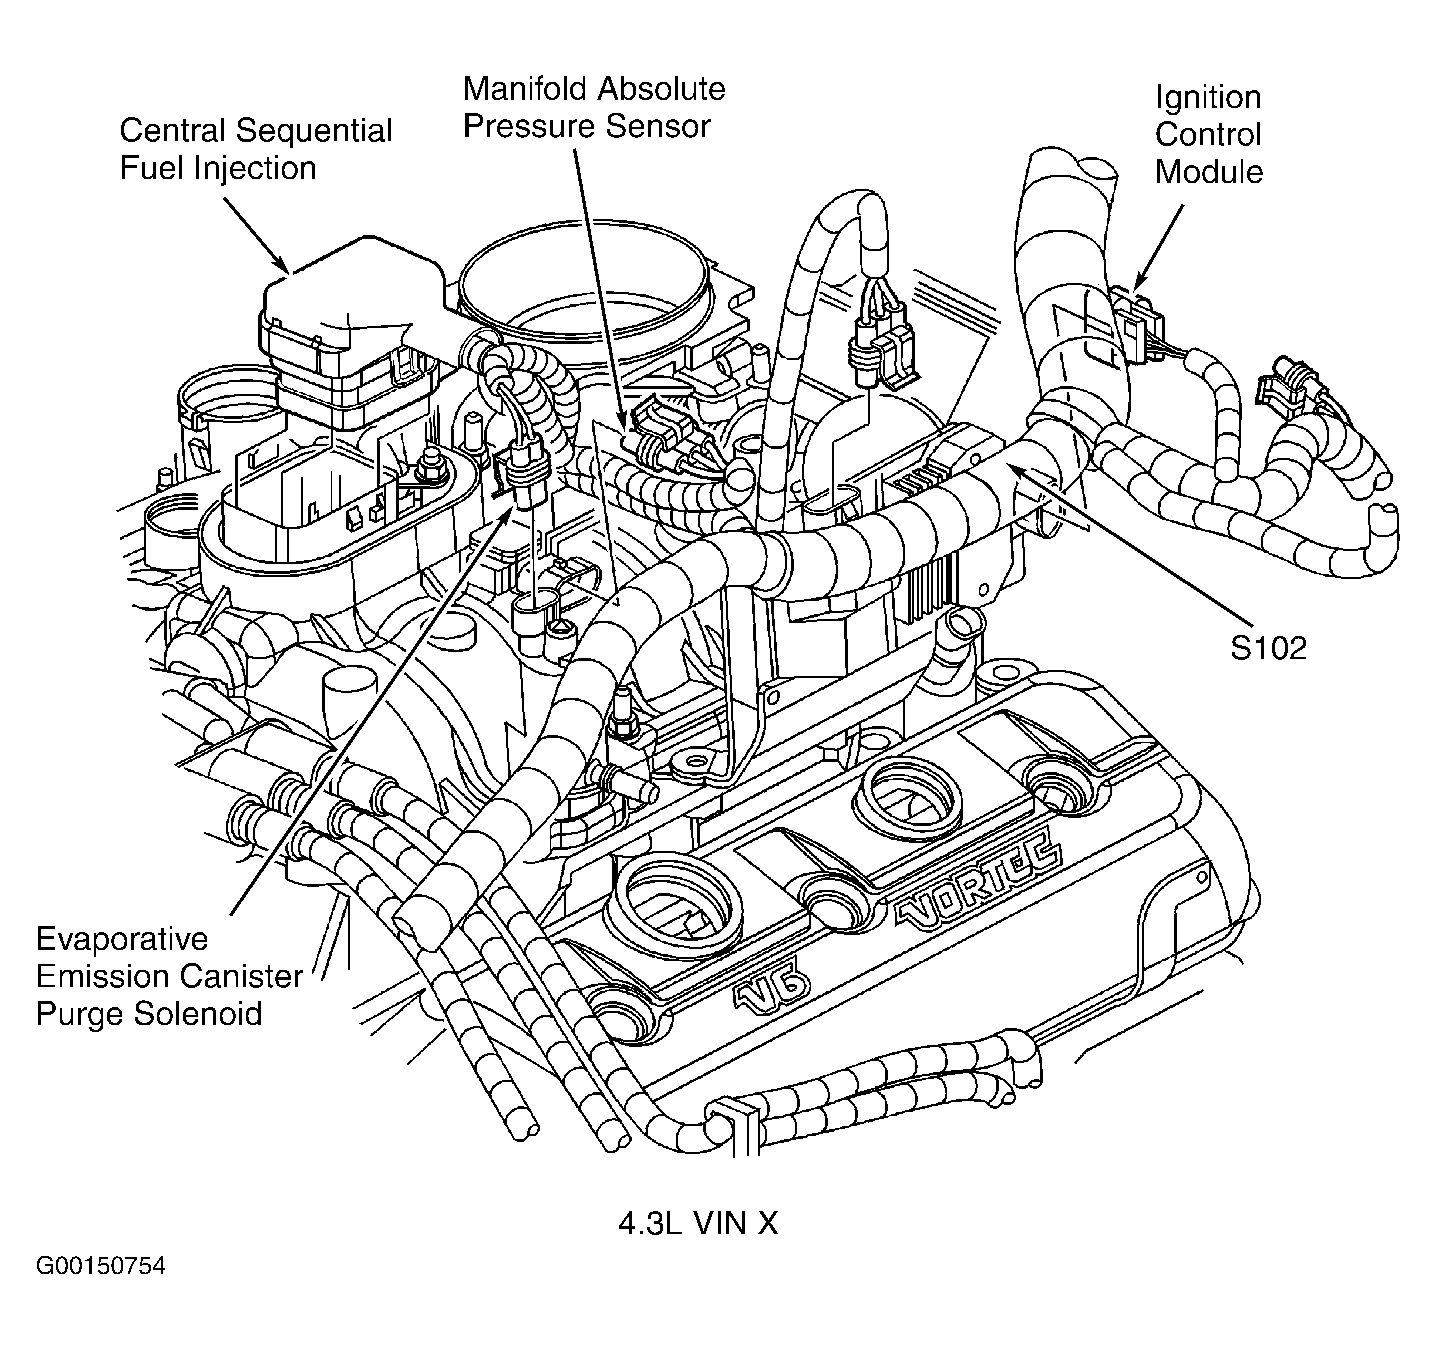 GMC Savana H1500 2003 - Component Locations -  Top Right Side Of Engine (4.3L VIN X)